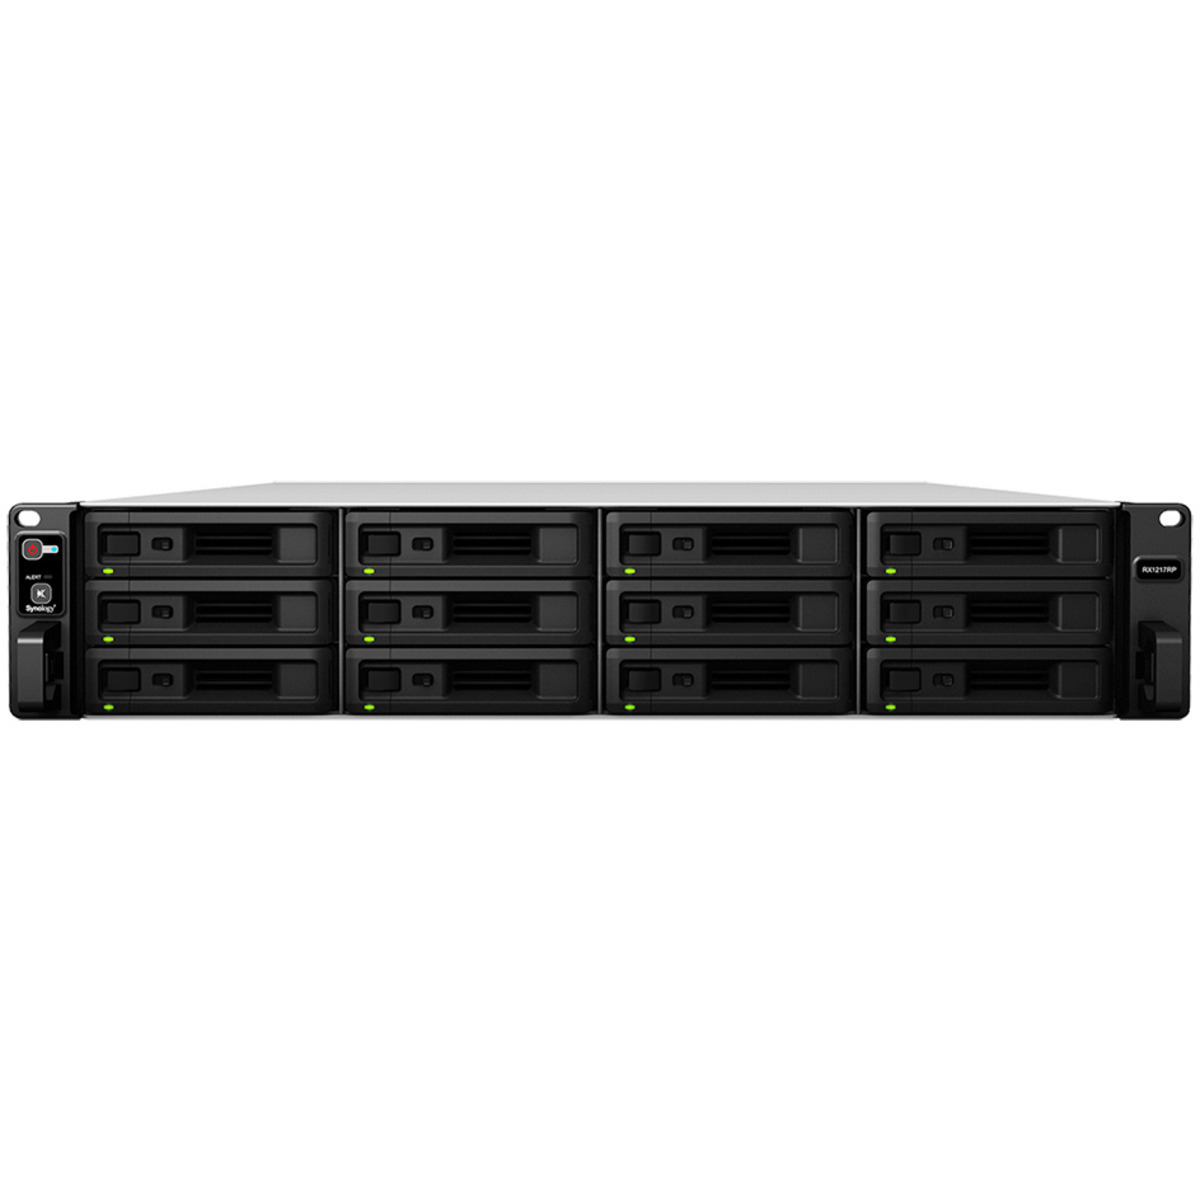 buy $4477 Synology RX1217 96tb RackMount Expansion Enclosure 12x8000gb Toshiba Enterprise Capacity MG08ADA800E 3.5 7200rpm SATA 6Gb/s HDD ENTERPRISE Class Drives Installed - Burn-In Tested - ON SALE - nas headquarters buy network attached storage server device das new raid-5 free shipping usa christmas new year holiday sale RX1217